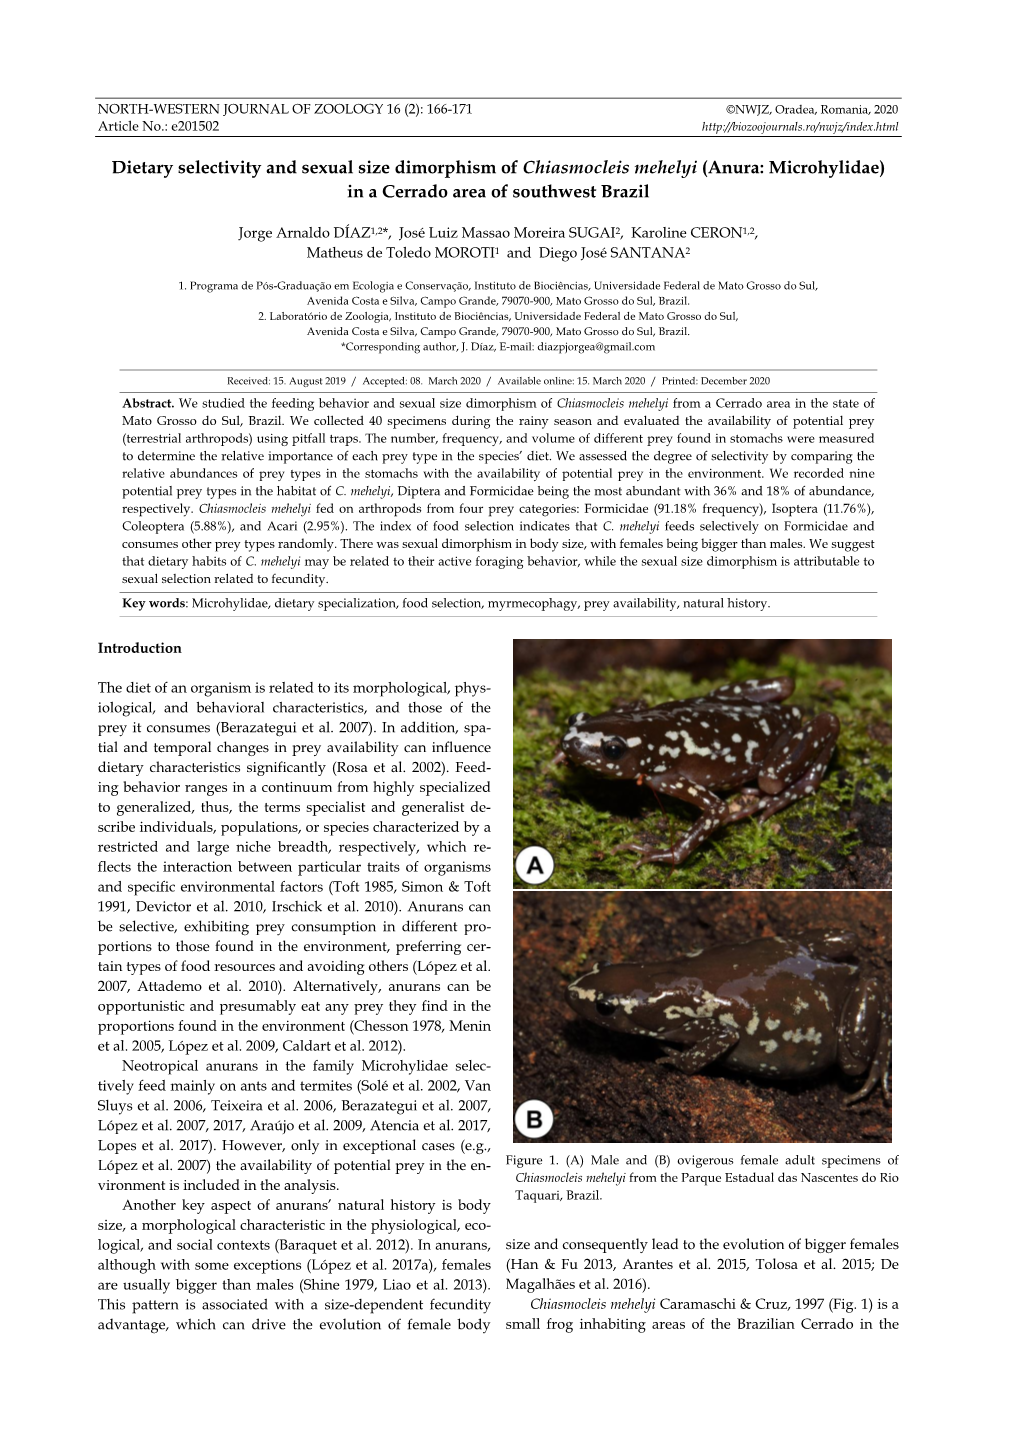 Dietary Selectivity and Sexual Size Dimorphism of Chiasmocleis Mehelyi (Anura: Microhylidae) in a Cerrado Area of Southwest Brazil